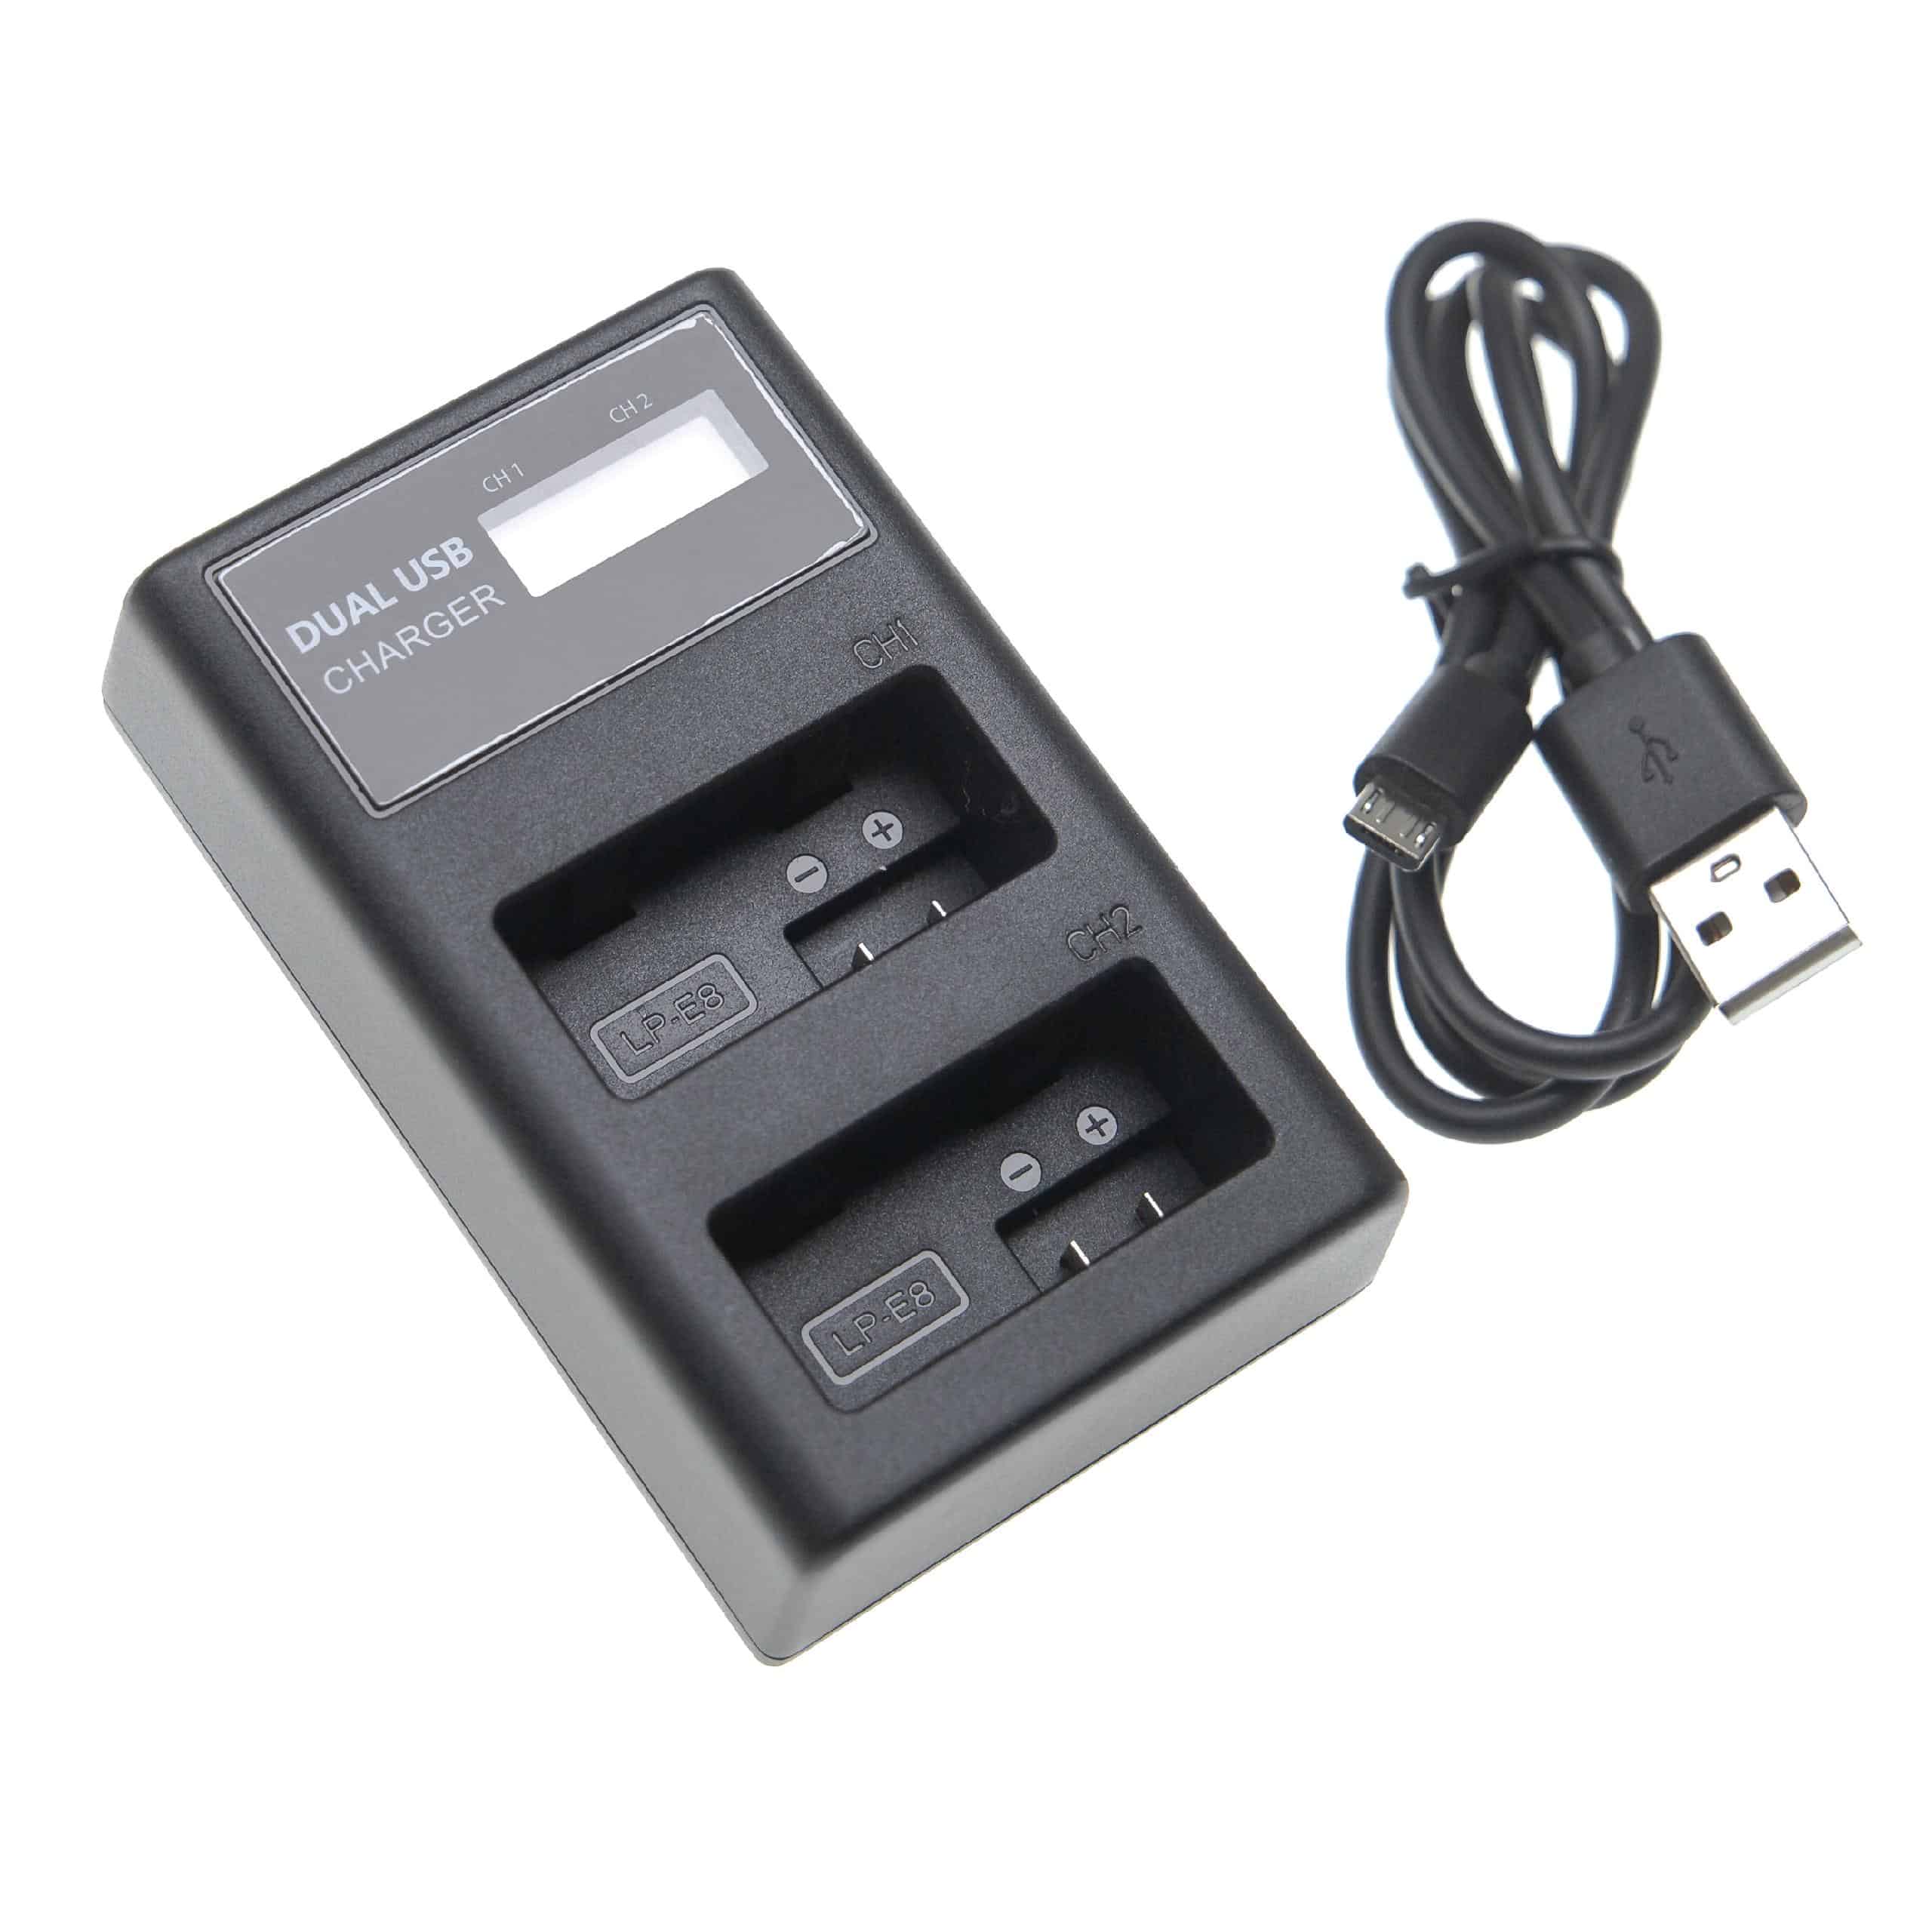 Battery Charger suitable for Canon LP-E8 Camera etc. - 0.5 A, 8.4 V